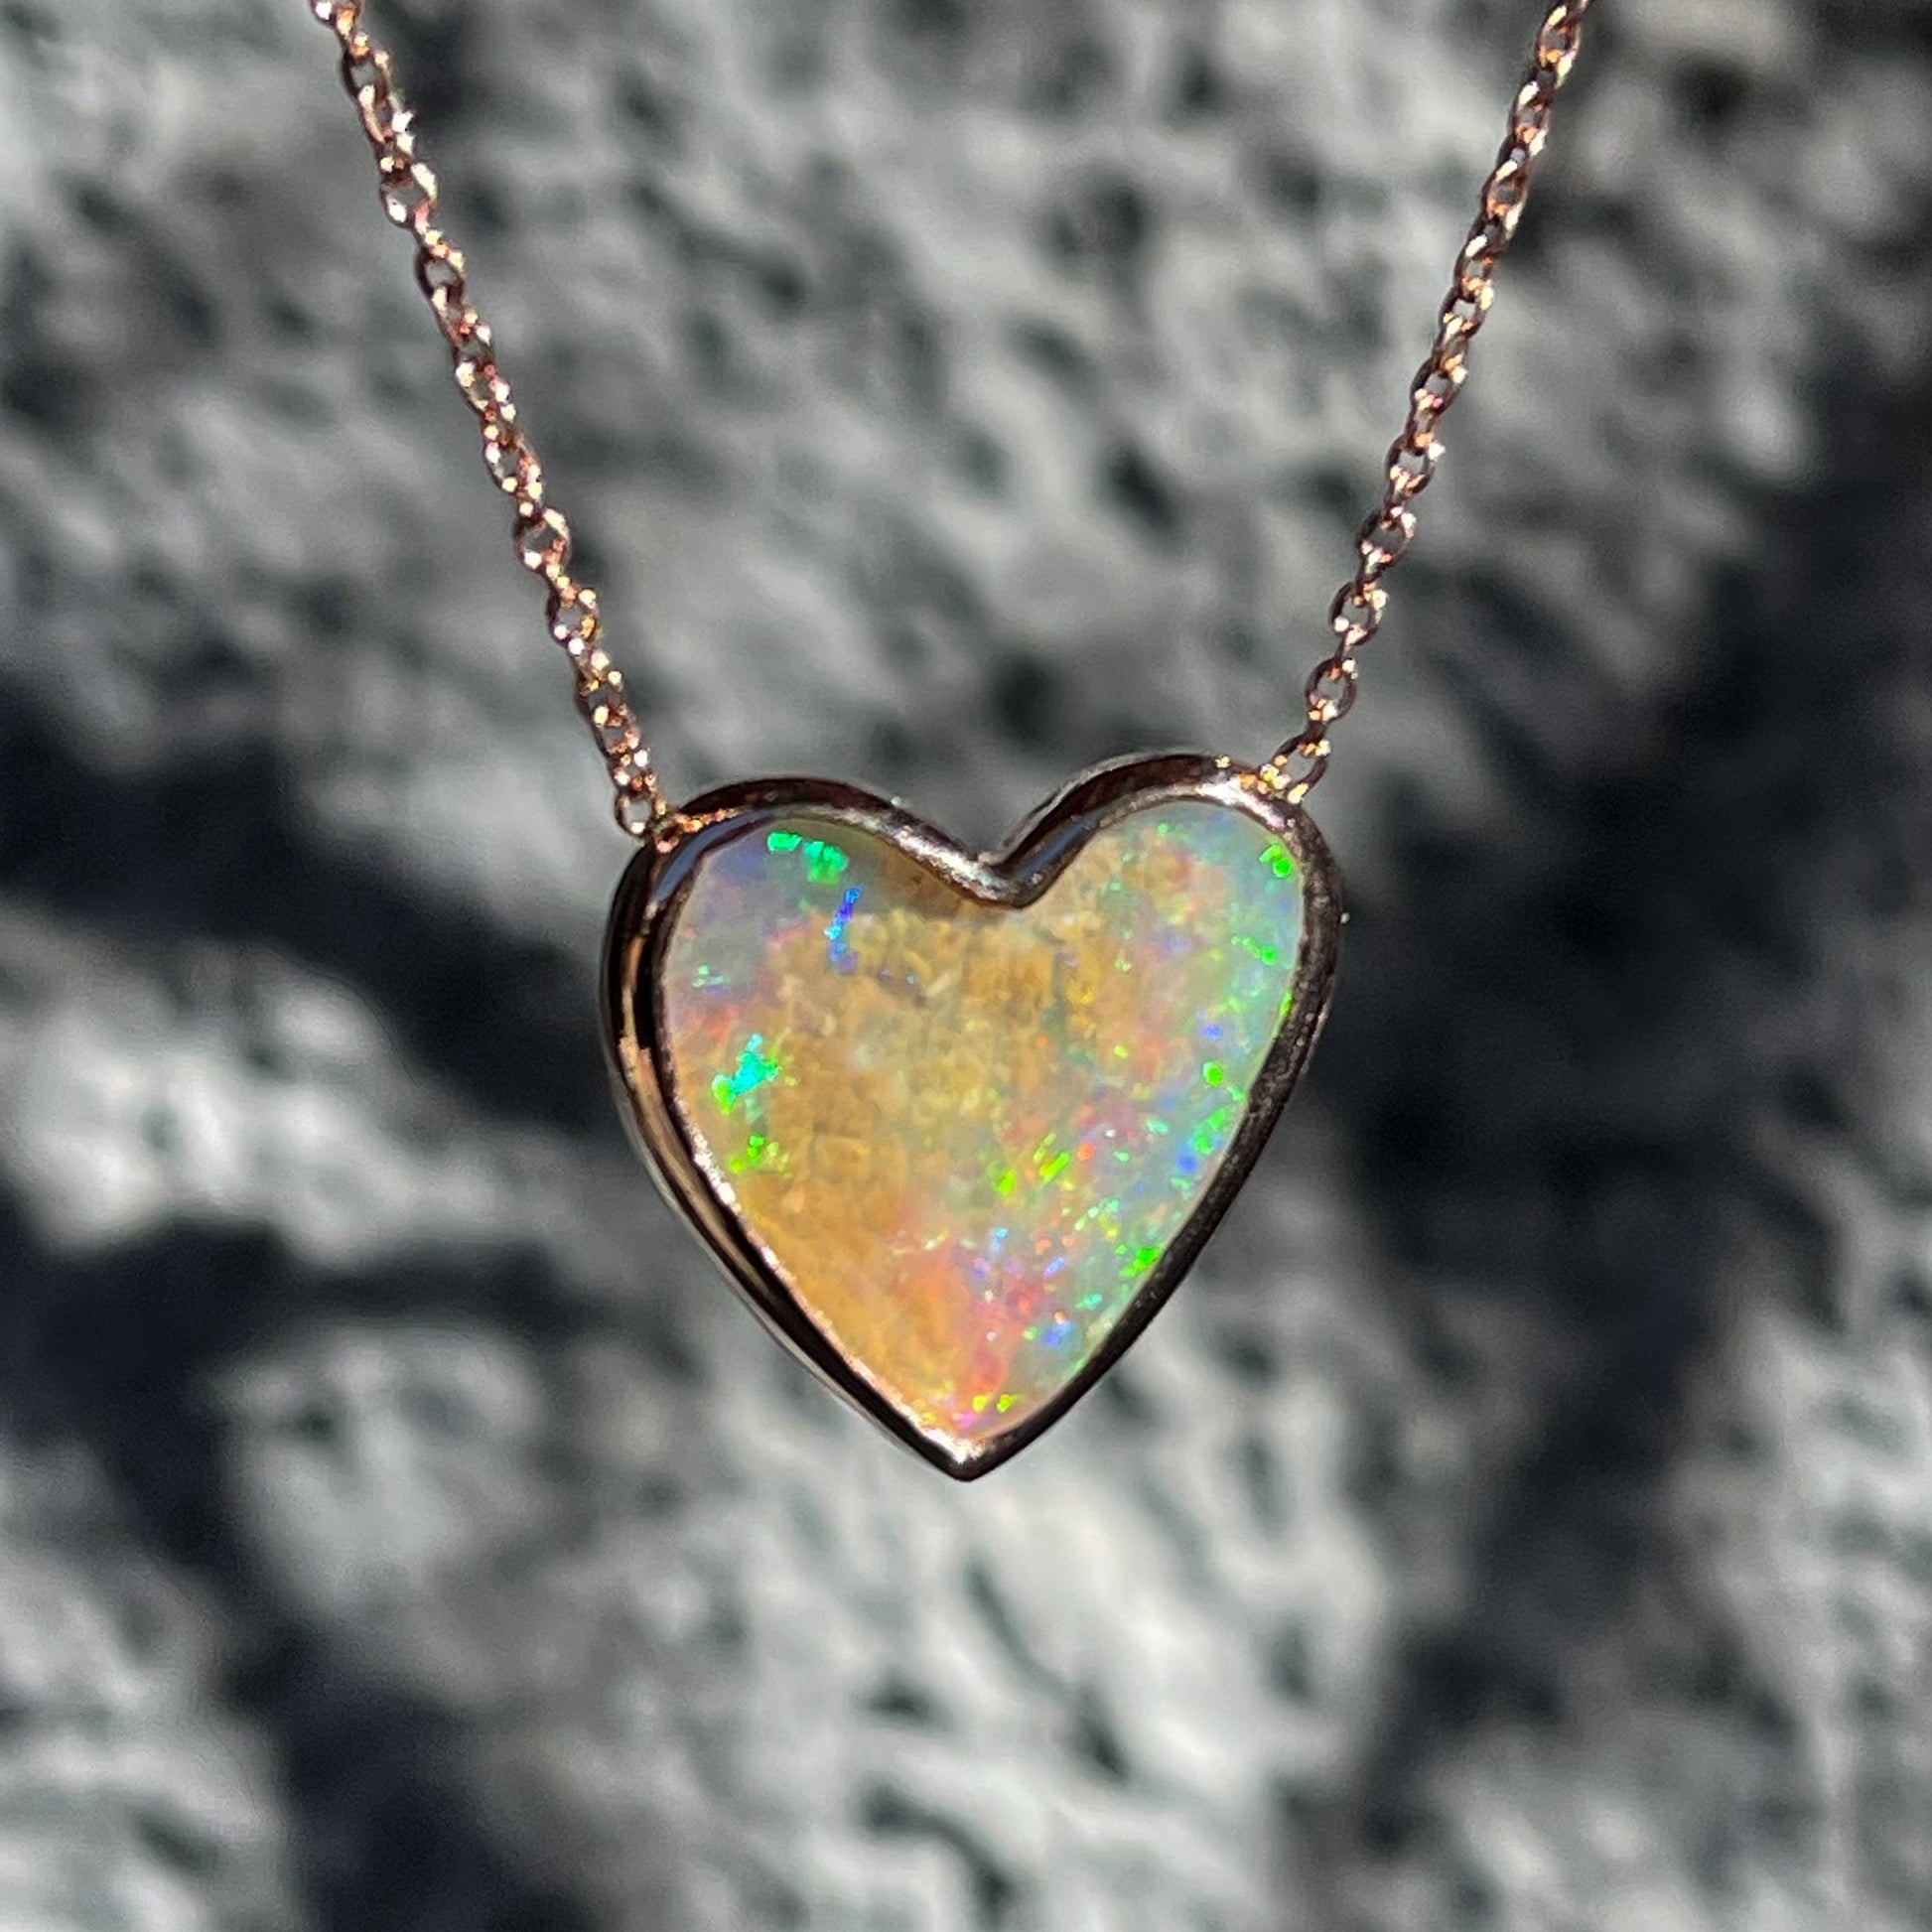 An Australian Opal Necklace by NIXIN Jewelry with a crystal opal in a bezel setting.